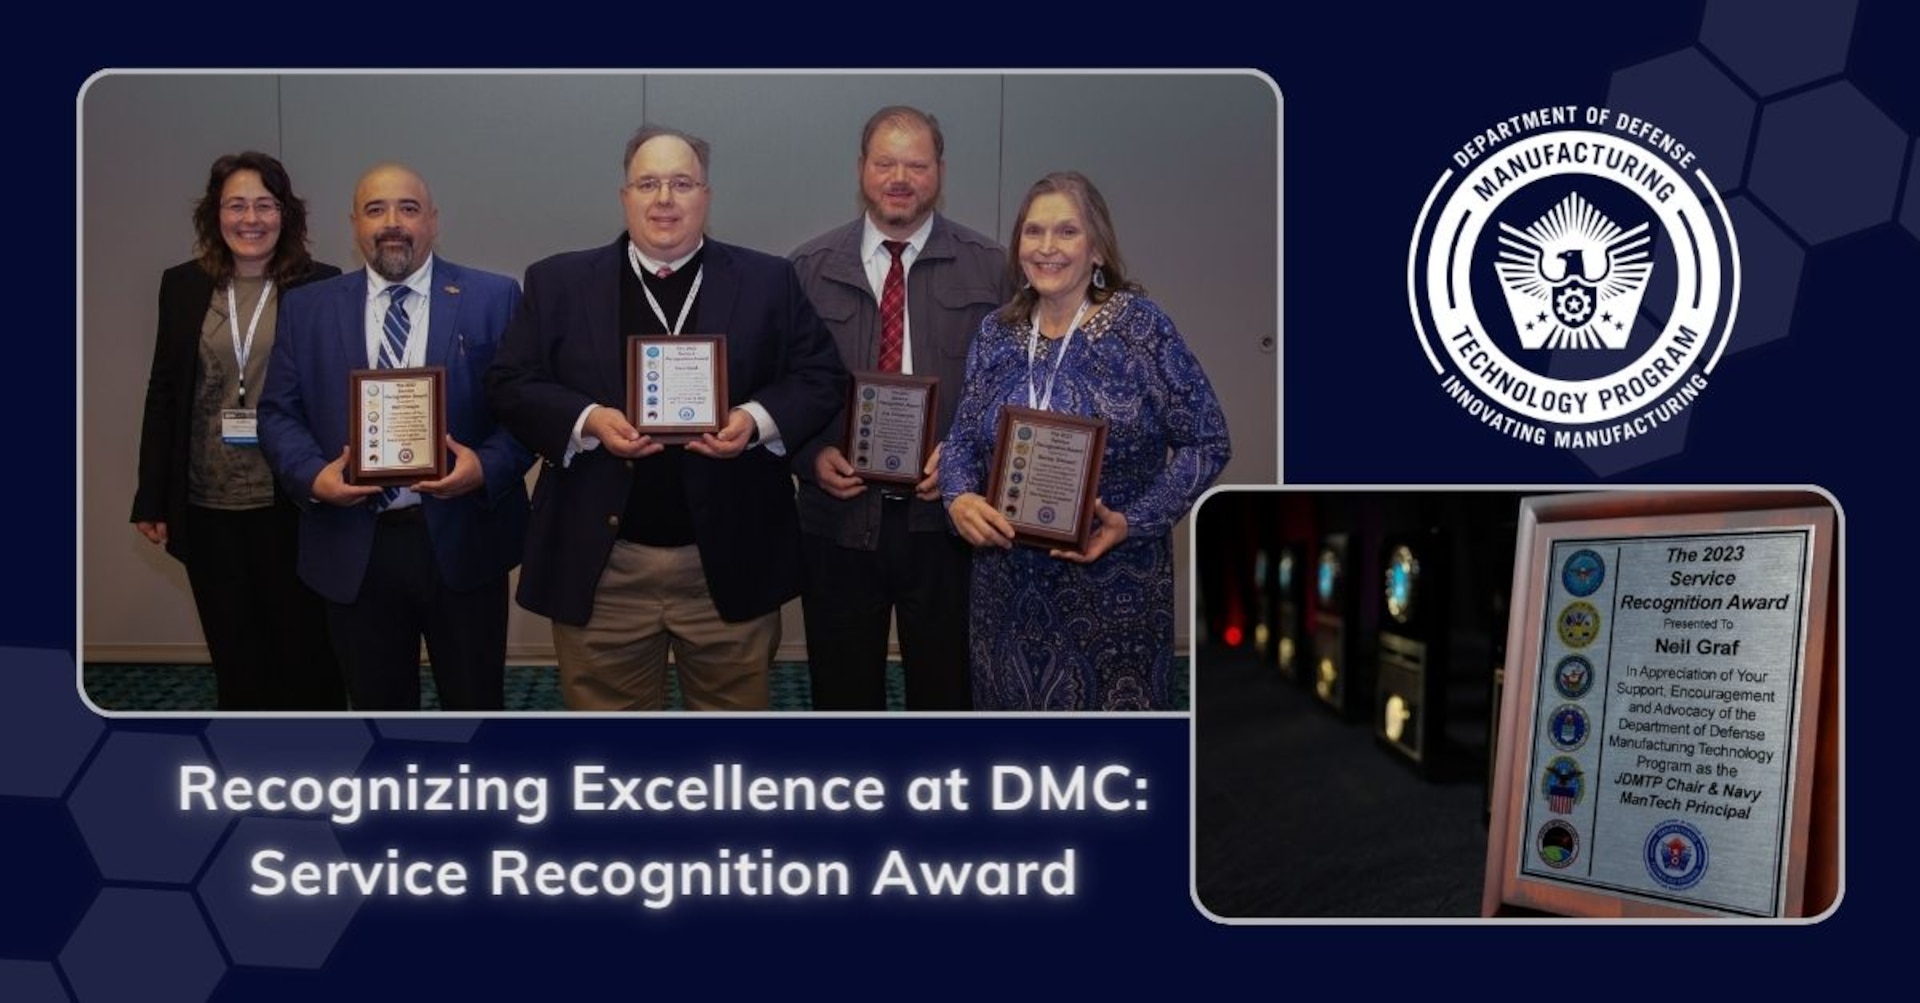 The five winners of the JDMTP Service Recognition Award at DMC 2023 in Nashville. Mr. Neil Graf, Mr. Will Crespo, Mr. Joseph Grobmyer, Ms. Becky Stewart, and Ms. Andrea Simmons.